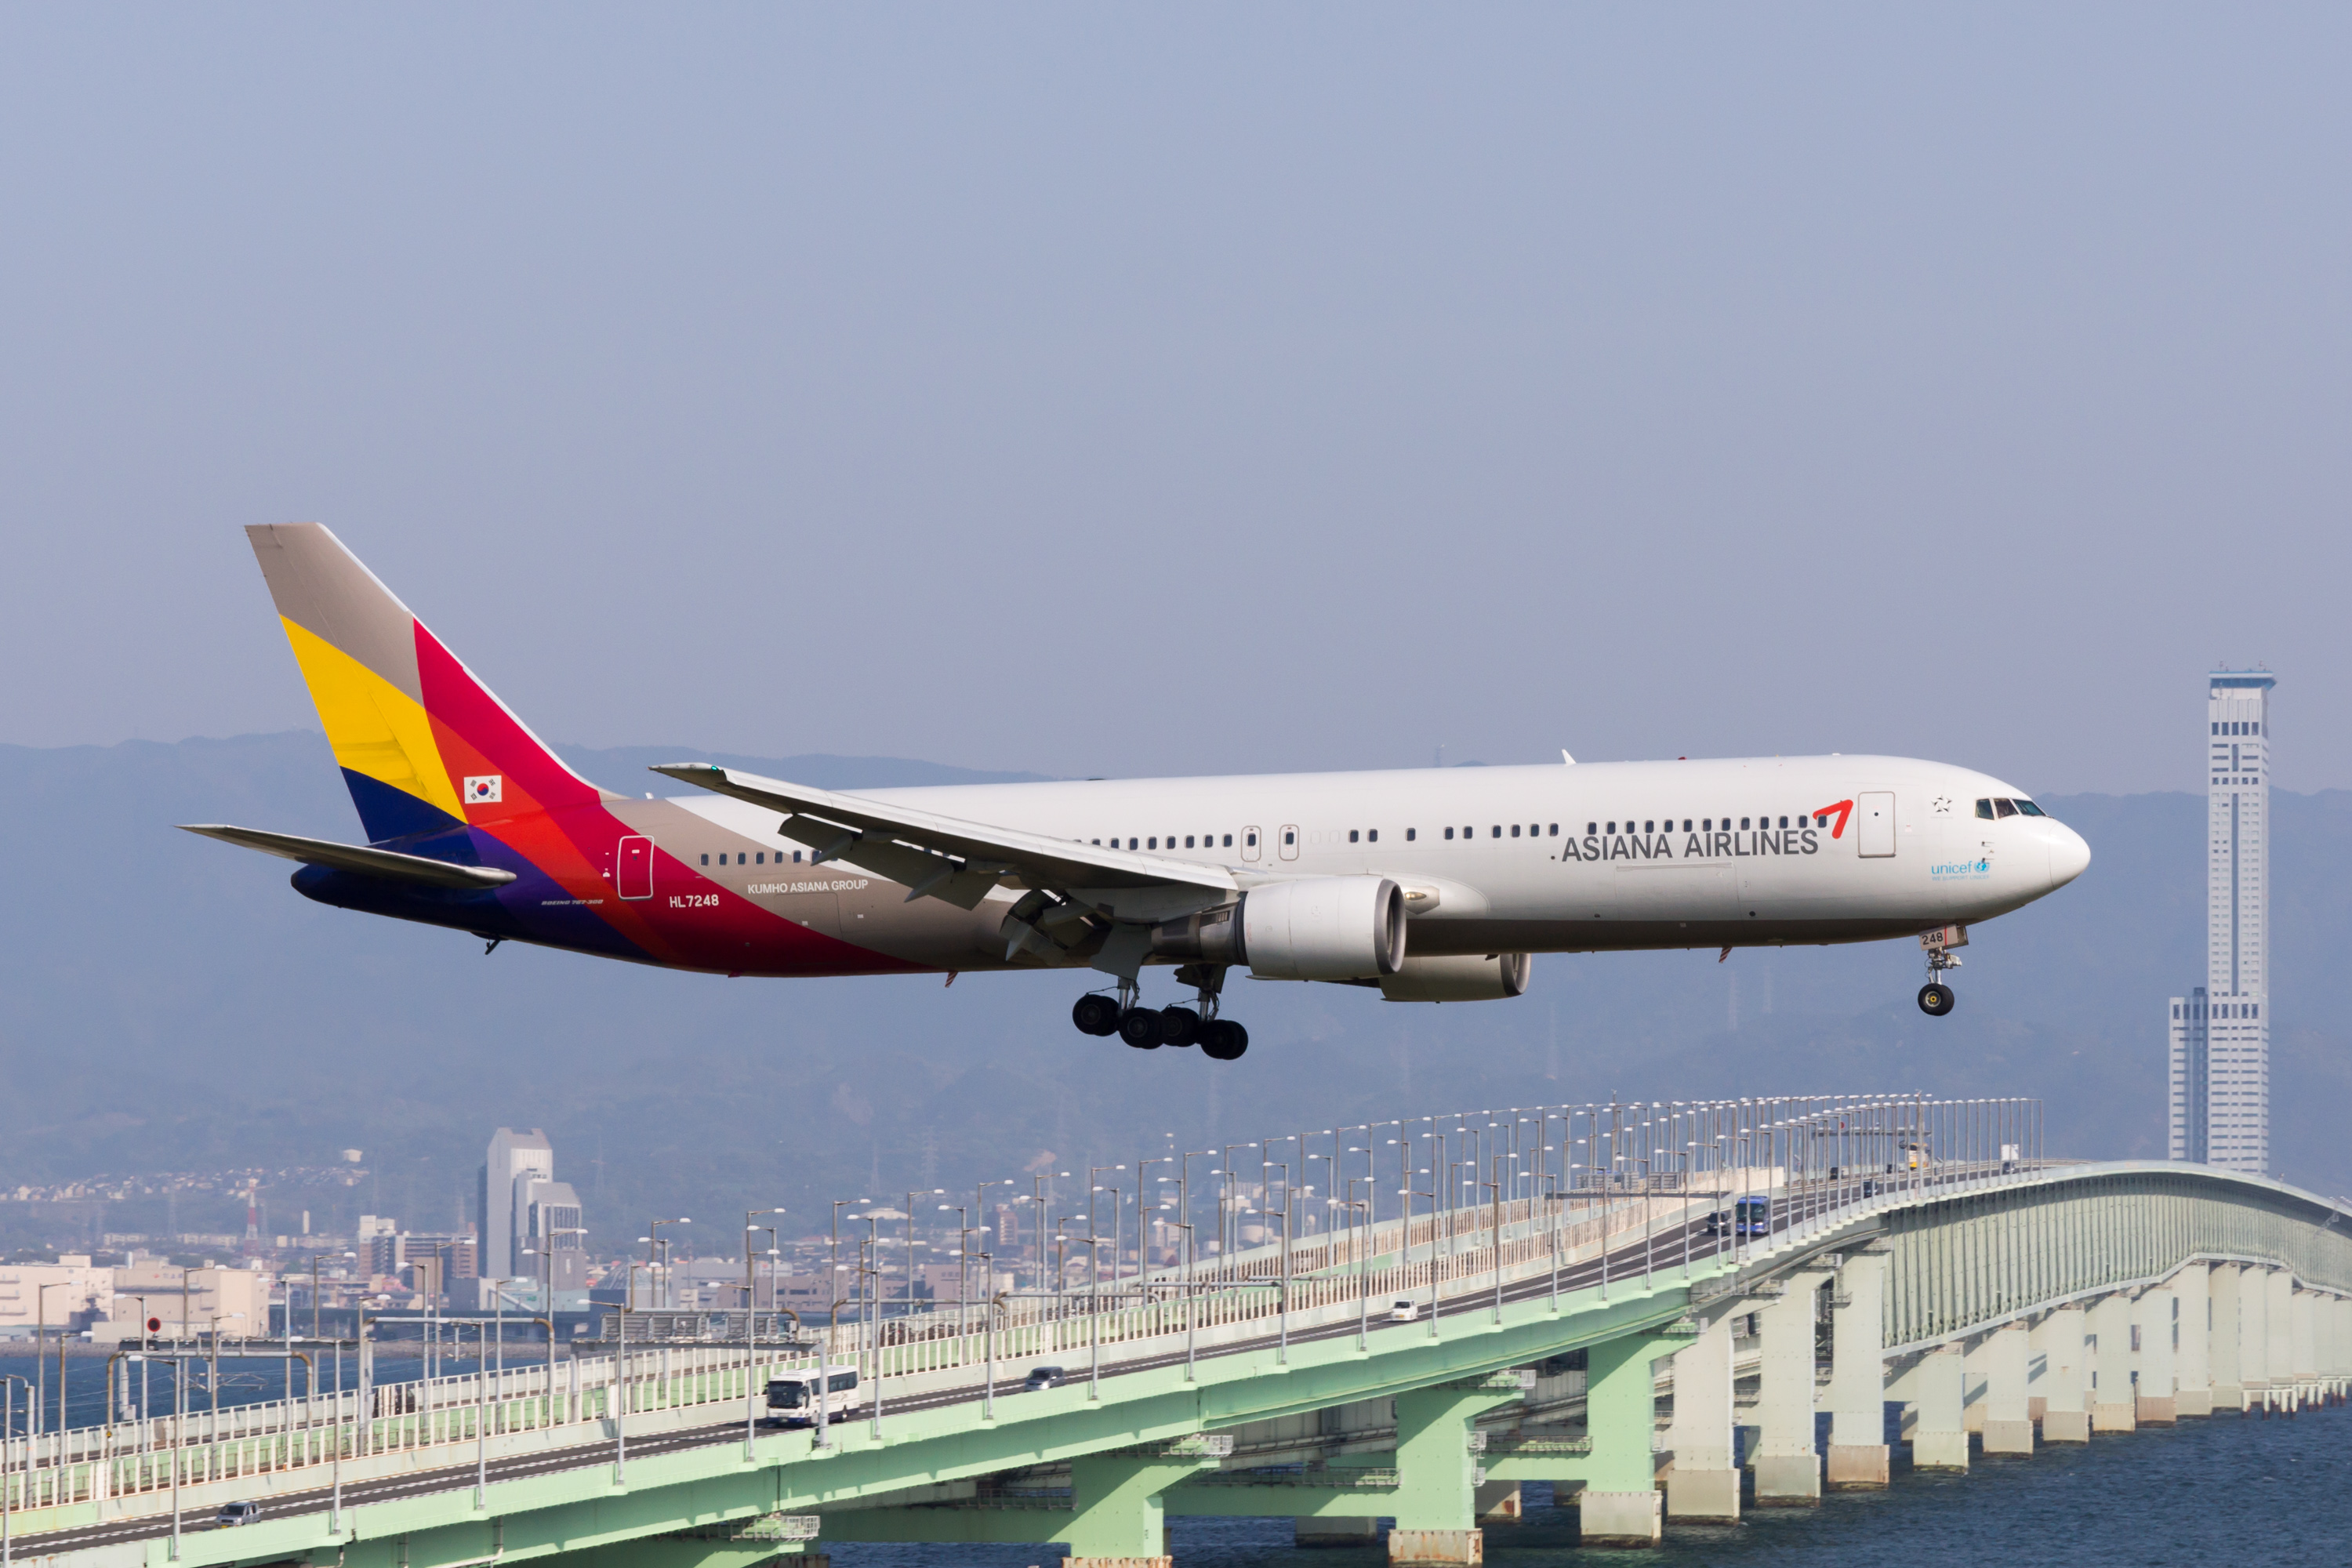 https://upload.wikimedia.org/wikipedia/commons/f/fd/Asiana_Airlines%2C_OZ114%2C_Boeing_767-38E%2C_HL7248%2C_Arrived_from_Seoul%2C_Kansai_Airport_%2816567840033%29.jpg